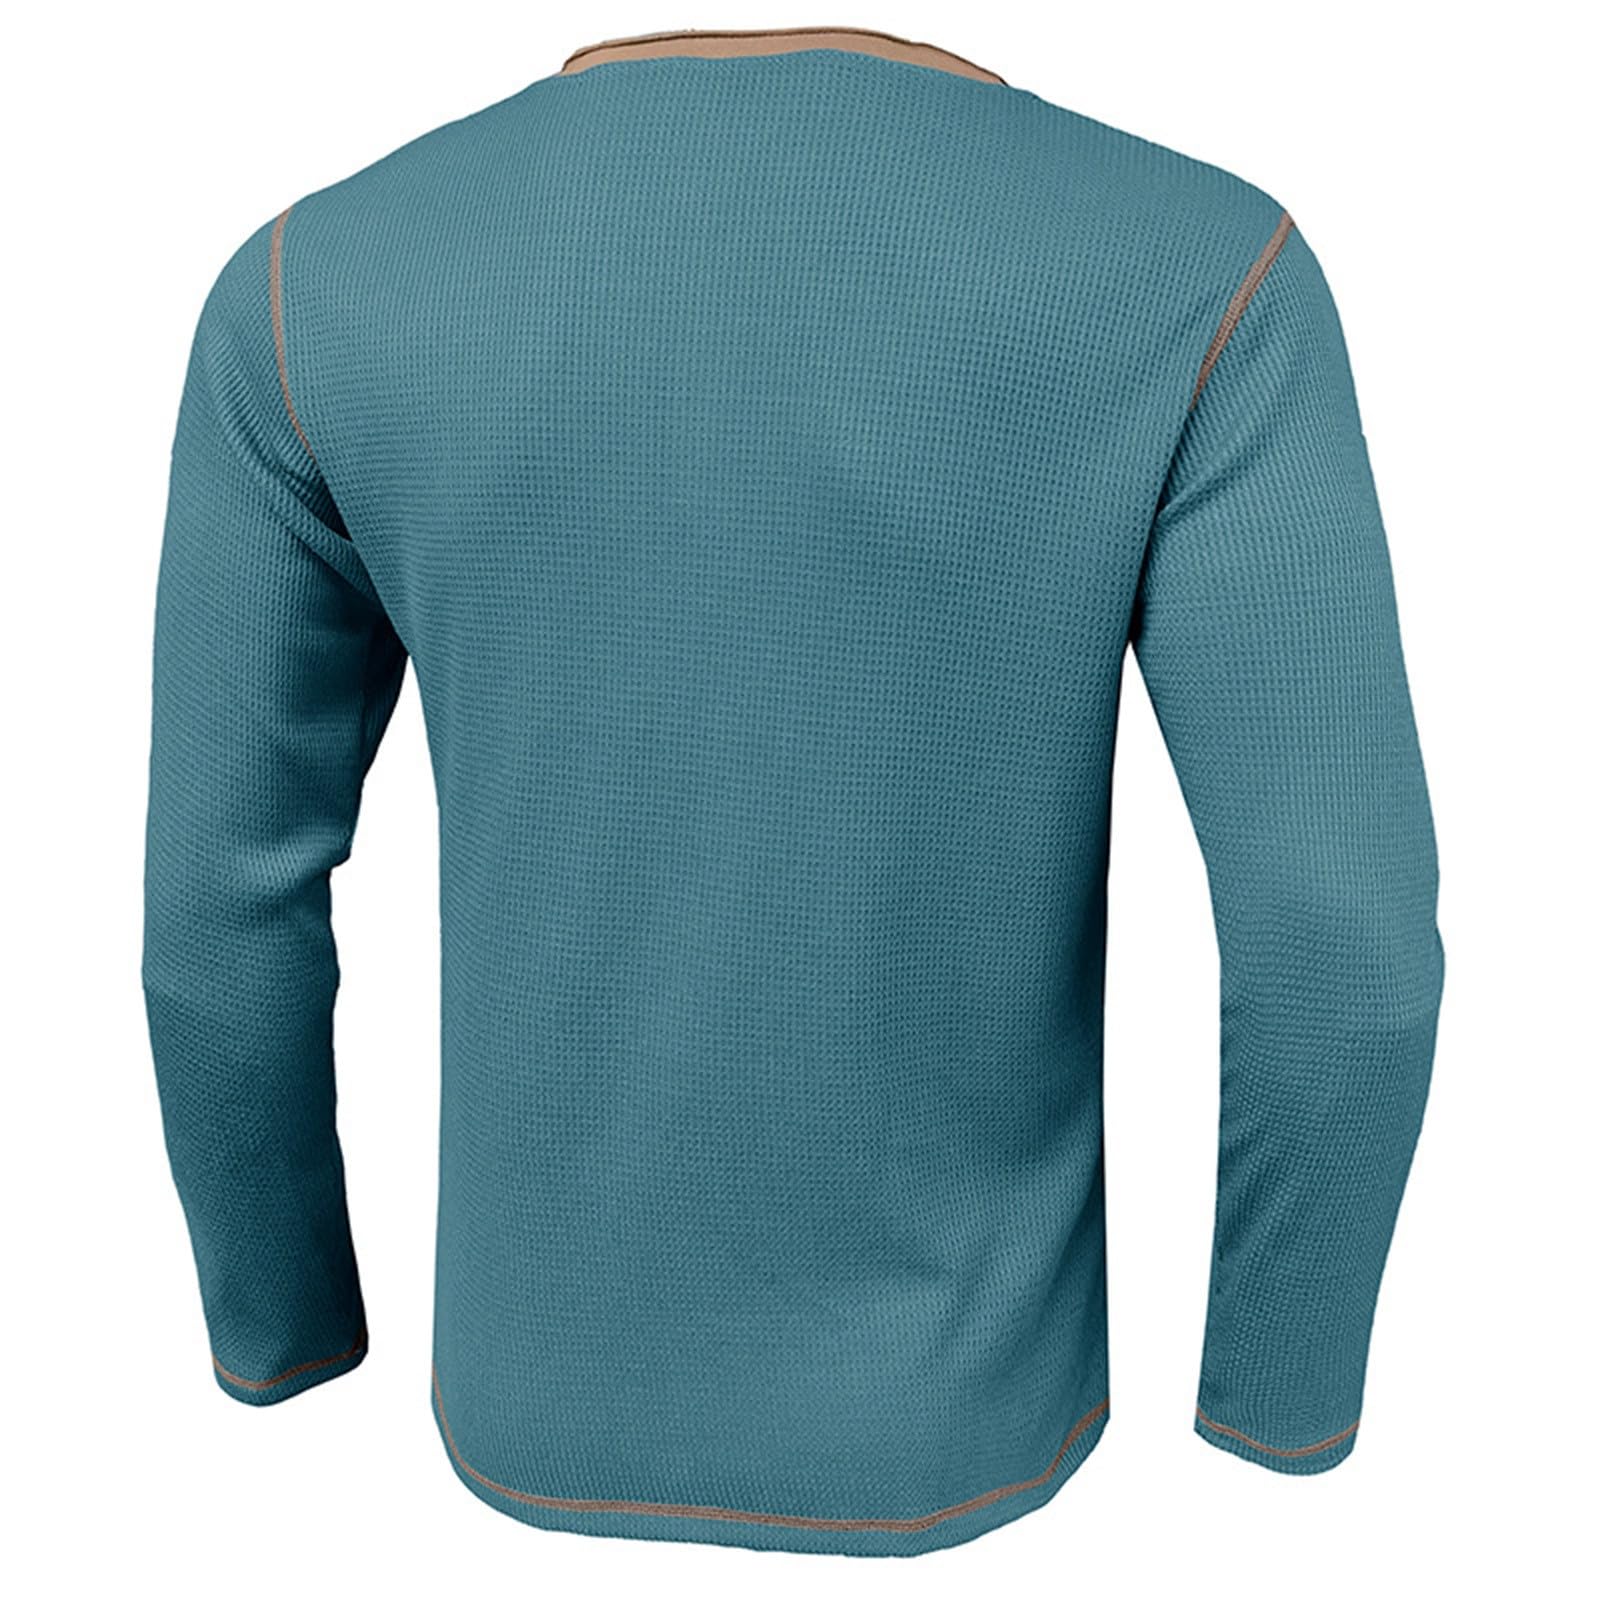 Buy Men's Long Sleeve Waffle Henley T-Shirts for Men, Fashion Colorblock  Button Tops Casual Slim Bottoming T-Shirt Blouse